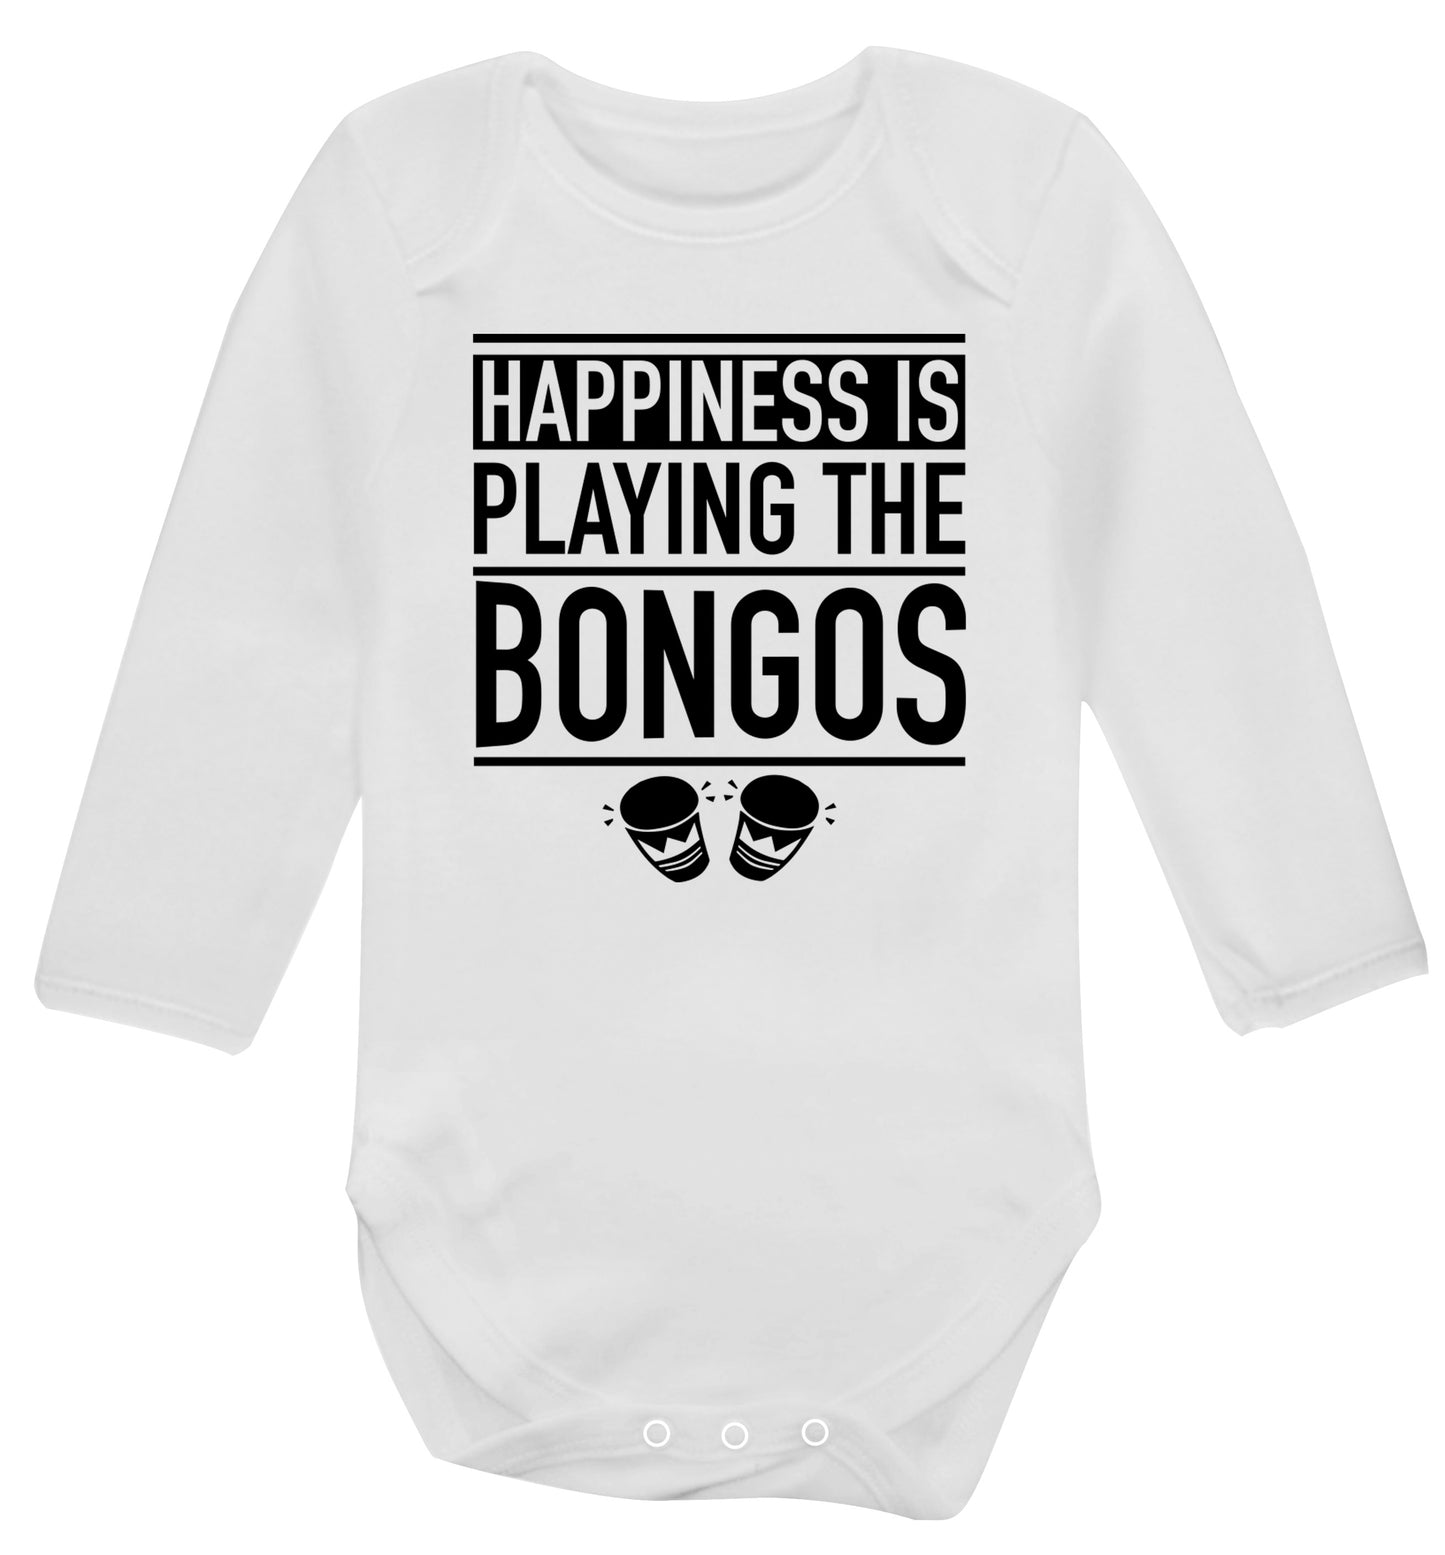 Happiness is playing the bongos Baby Vest long sleeved white 6-12 months